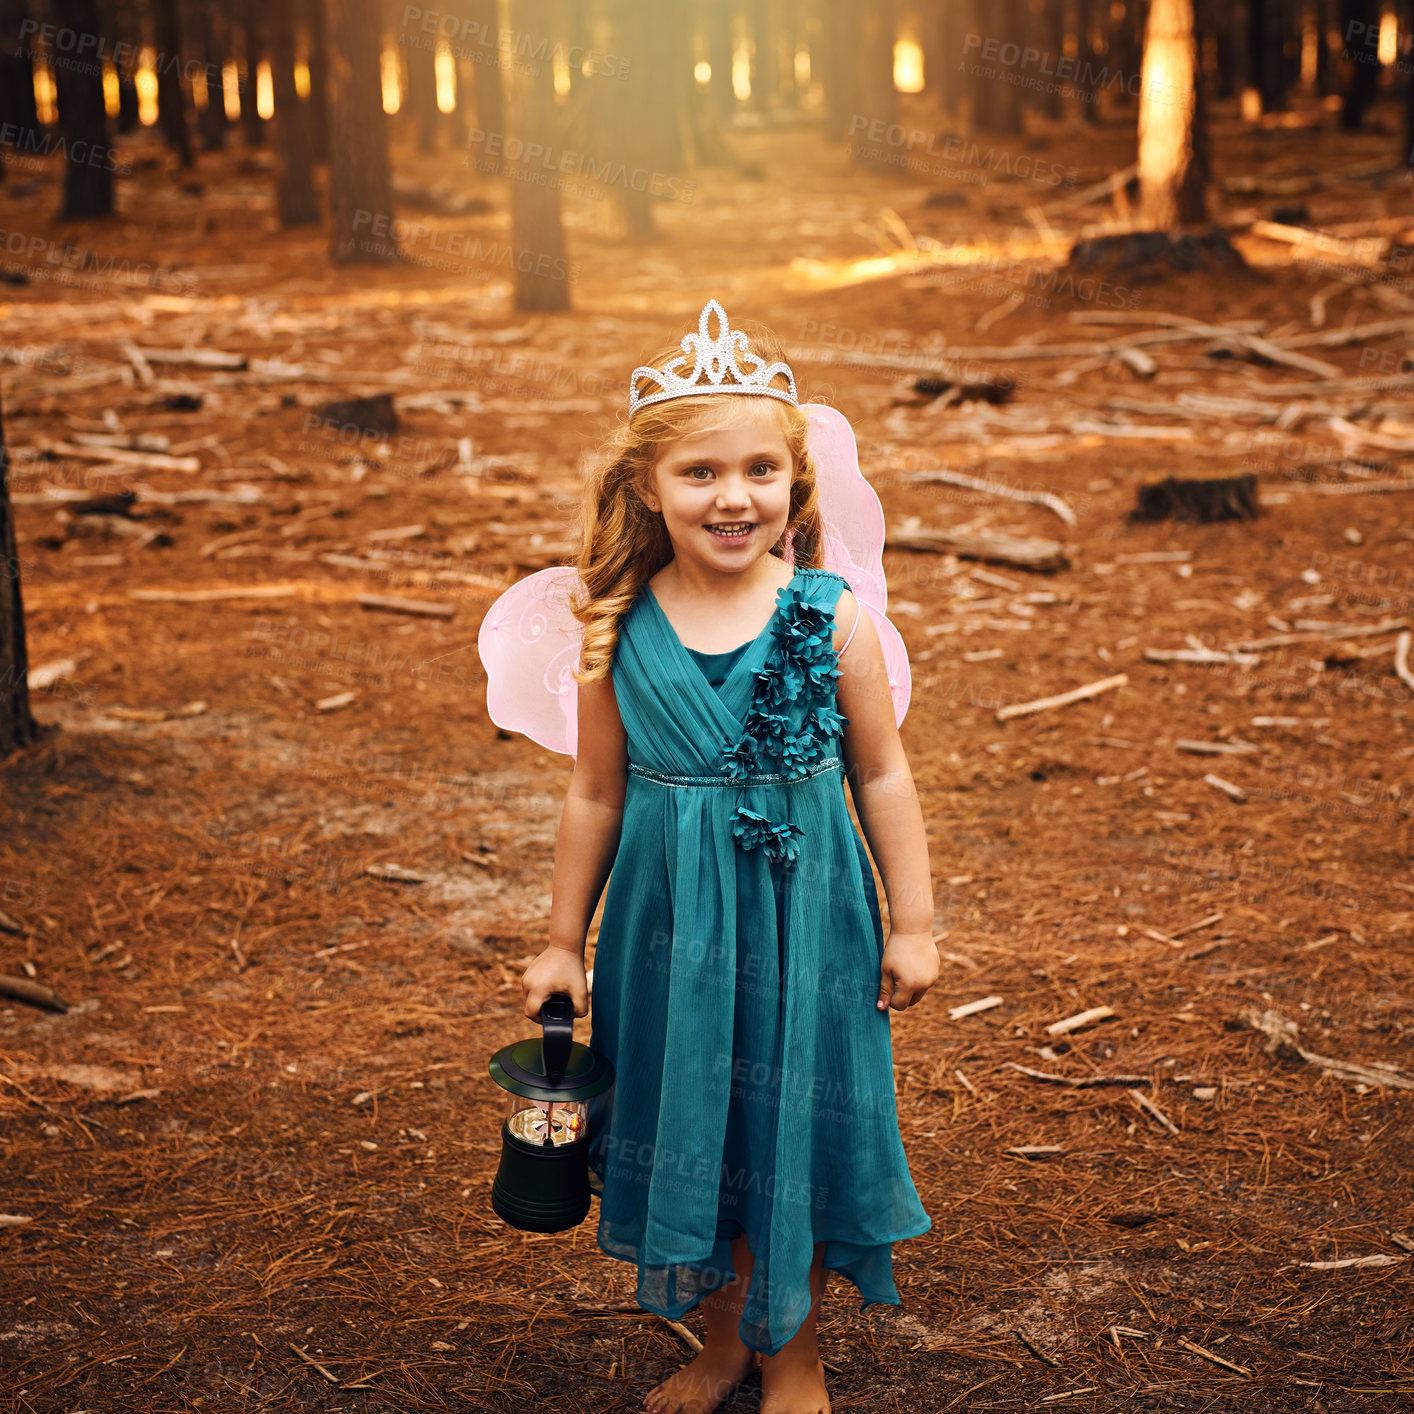 Buy stock photo Shot of a happy little girl looking at the camera and holding a lamp while standing outside in the woods